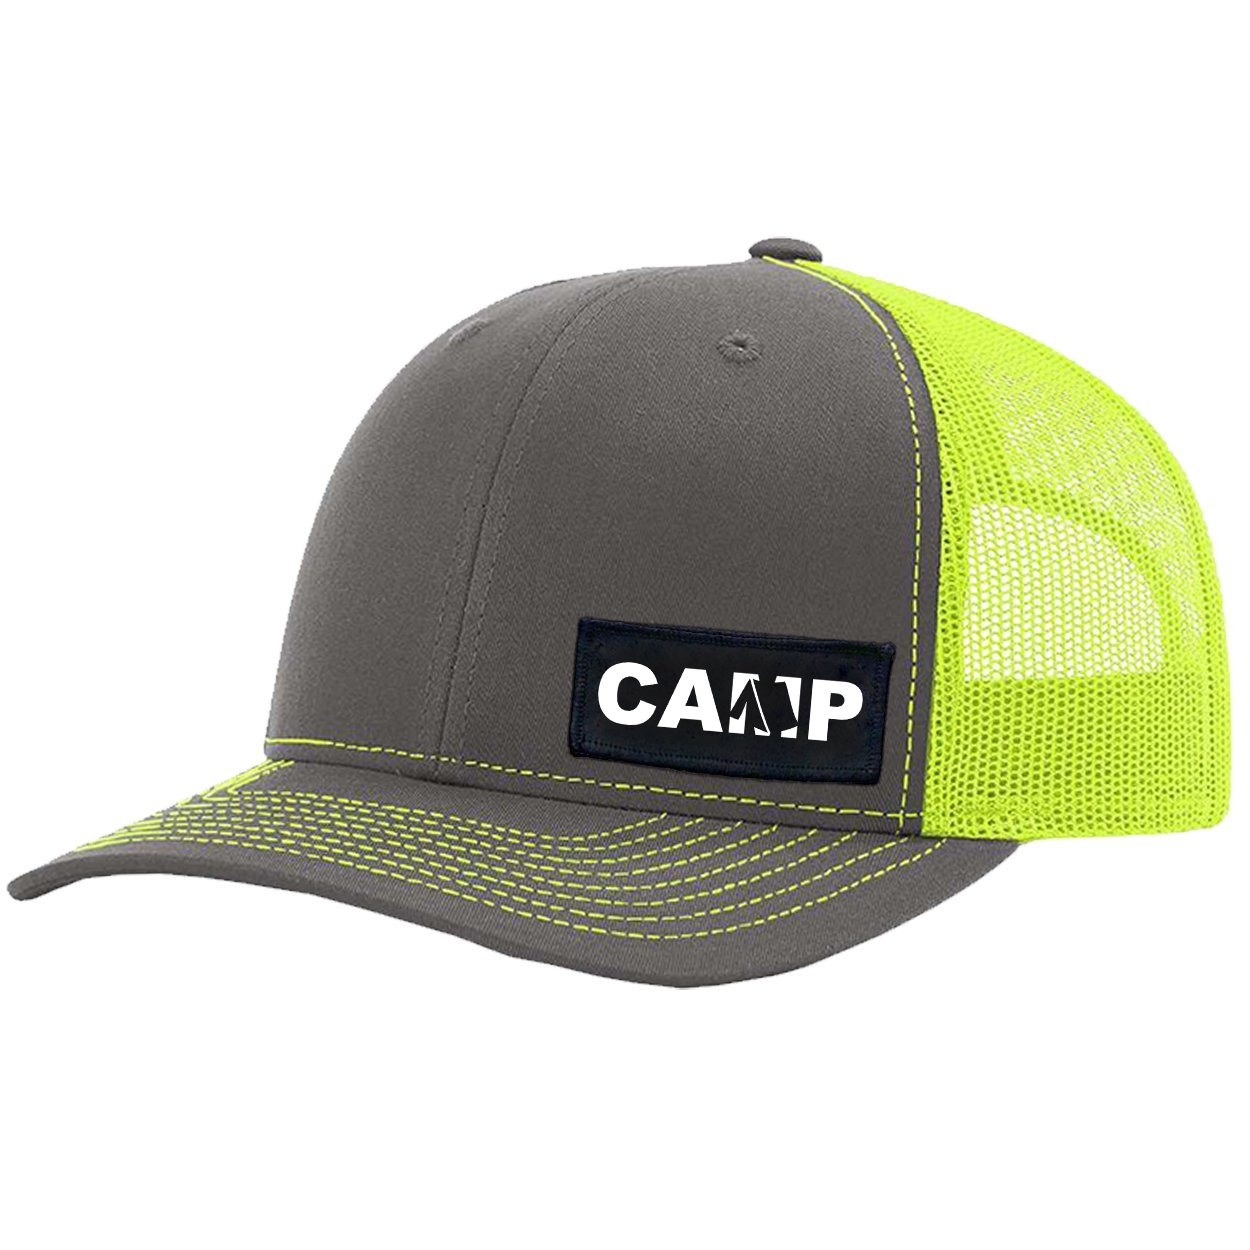 Camp Tent Logo Night Out Woven Patch Snapback Trucker Hat Gray/Neon Yellow (White Logo)